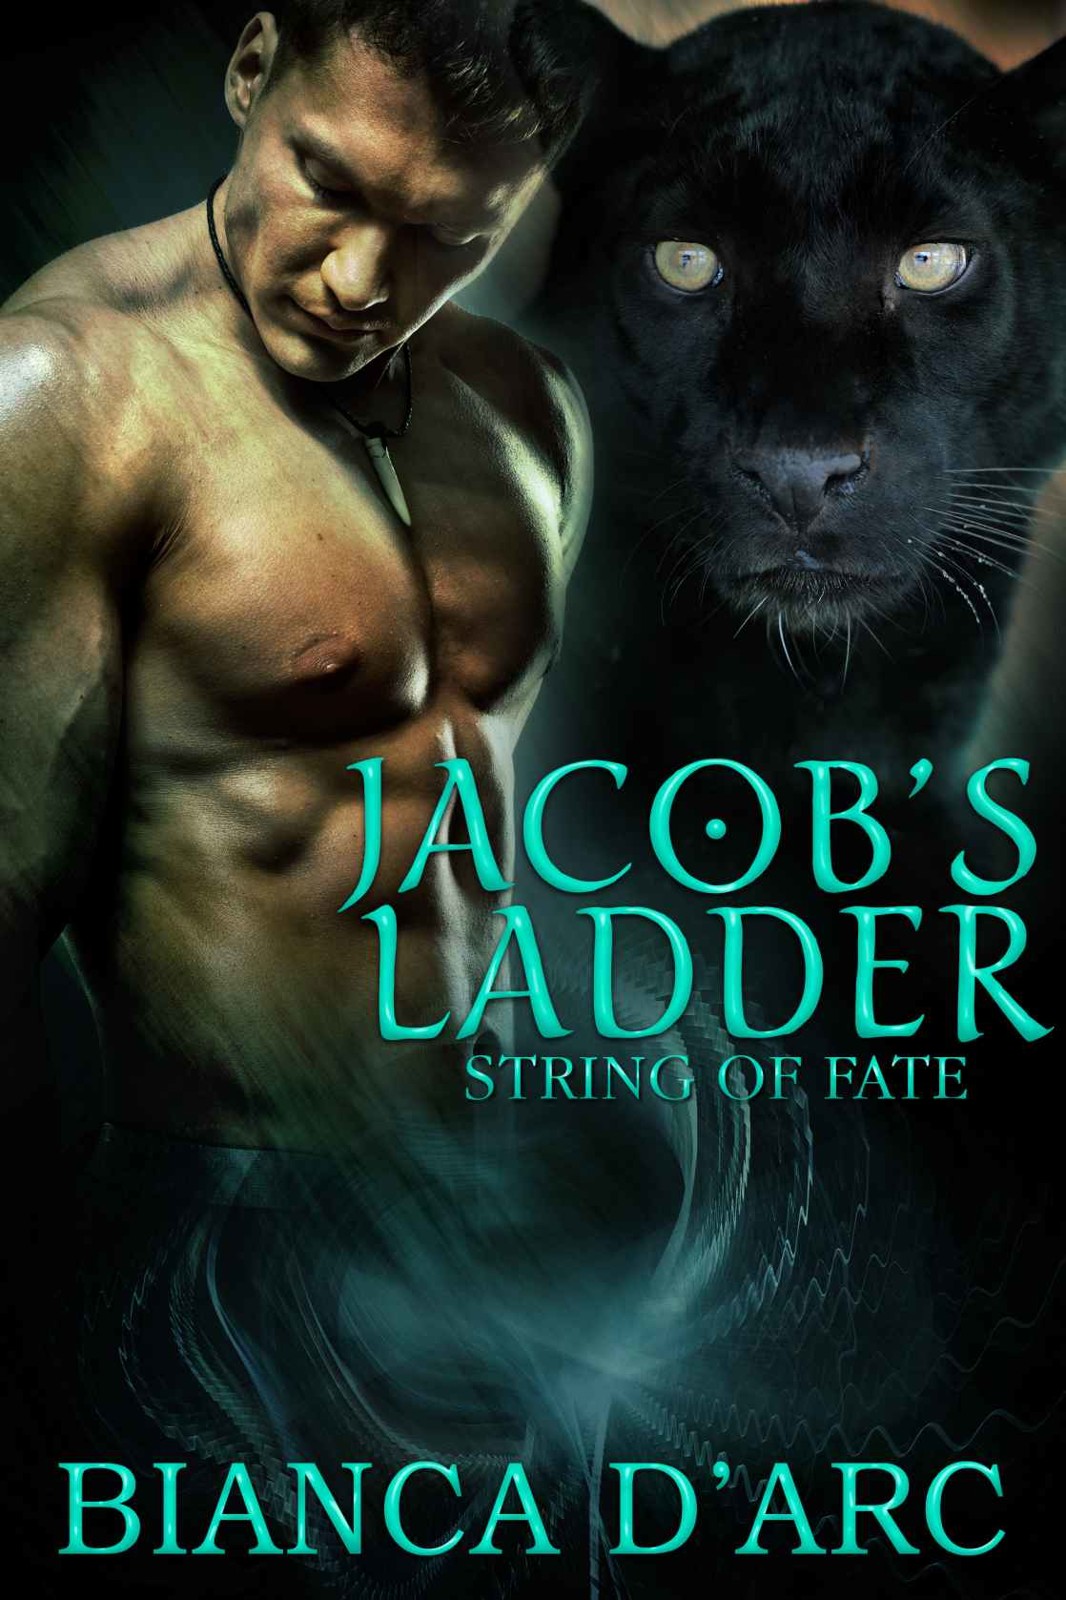 Jacob's Ladder (String of Fate) by Bianca D'Arc